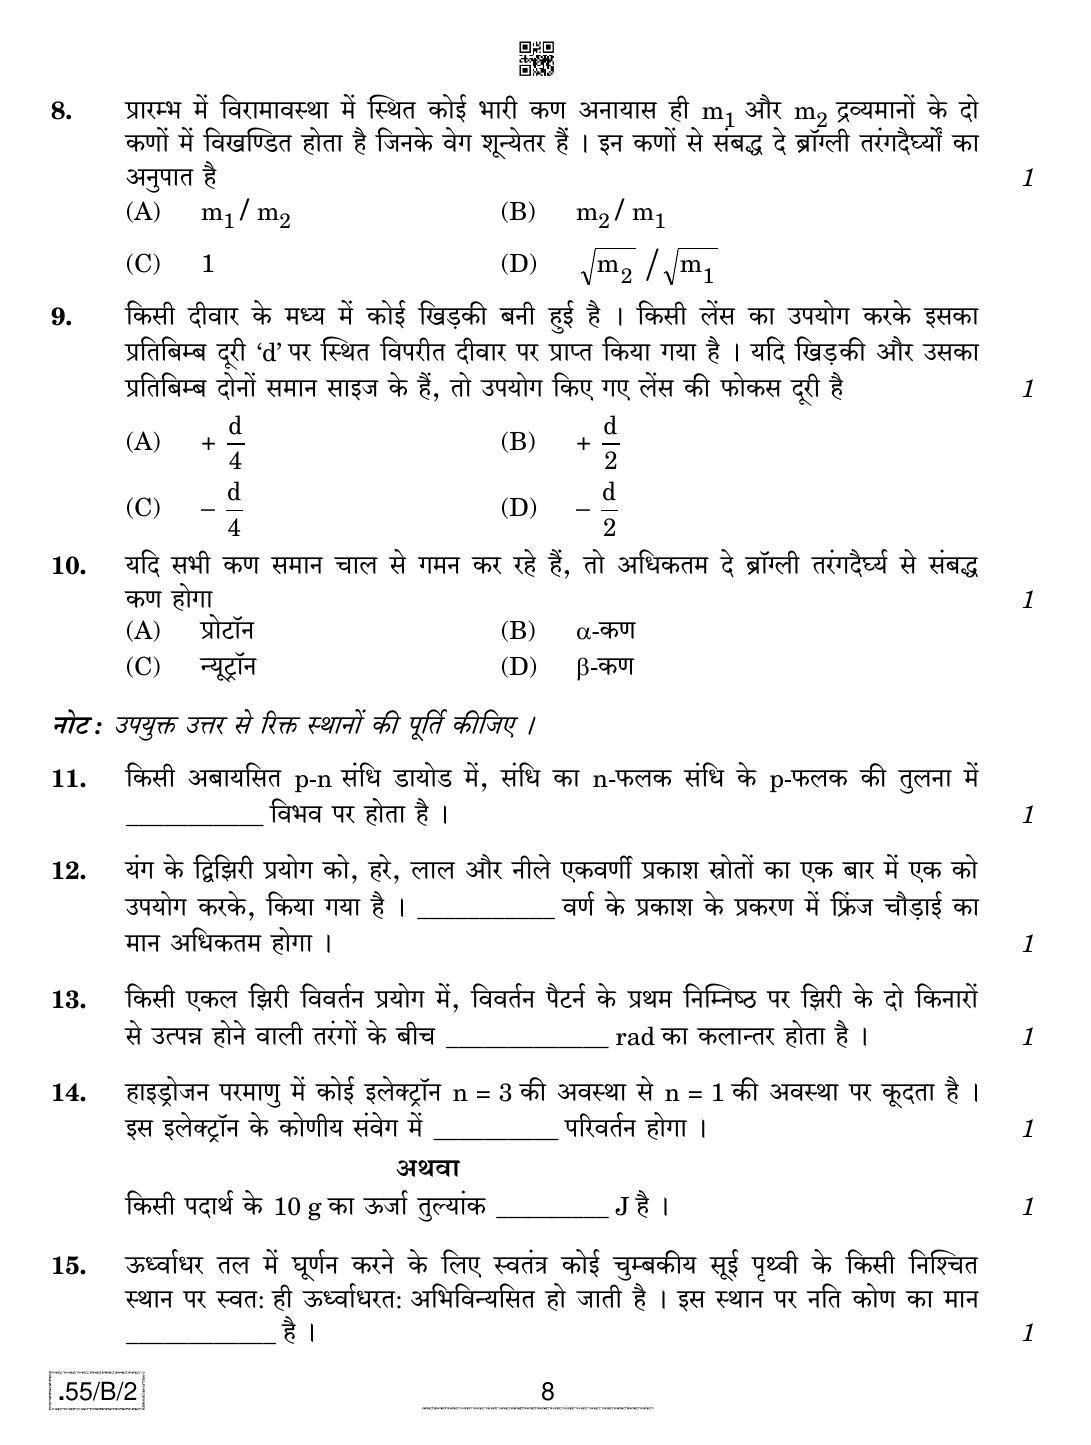 CBSE Class 12 55-C-2 - Physics 2020 Compartment Question Paper - Page 8